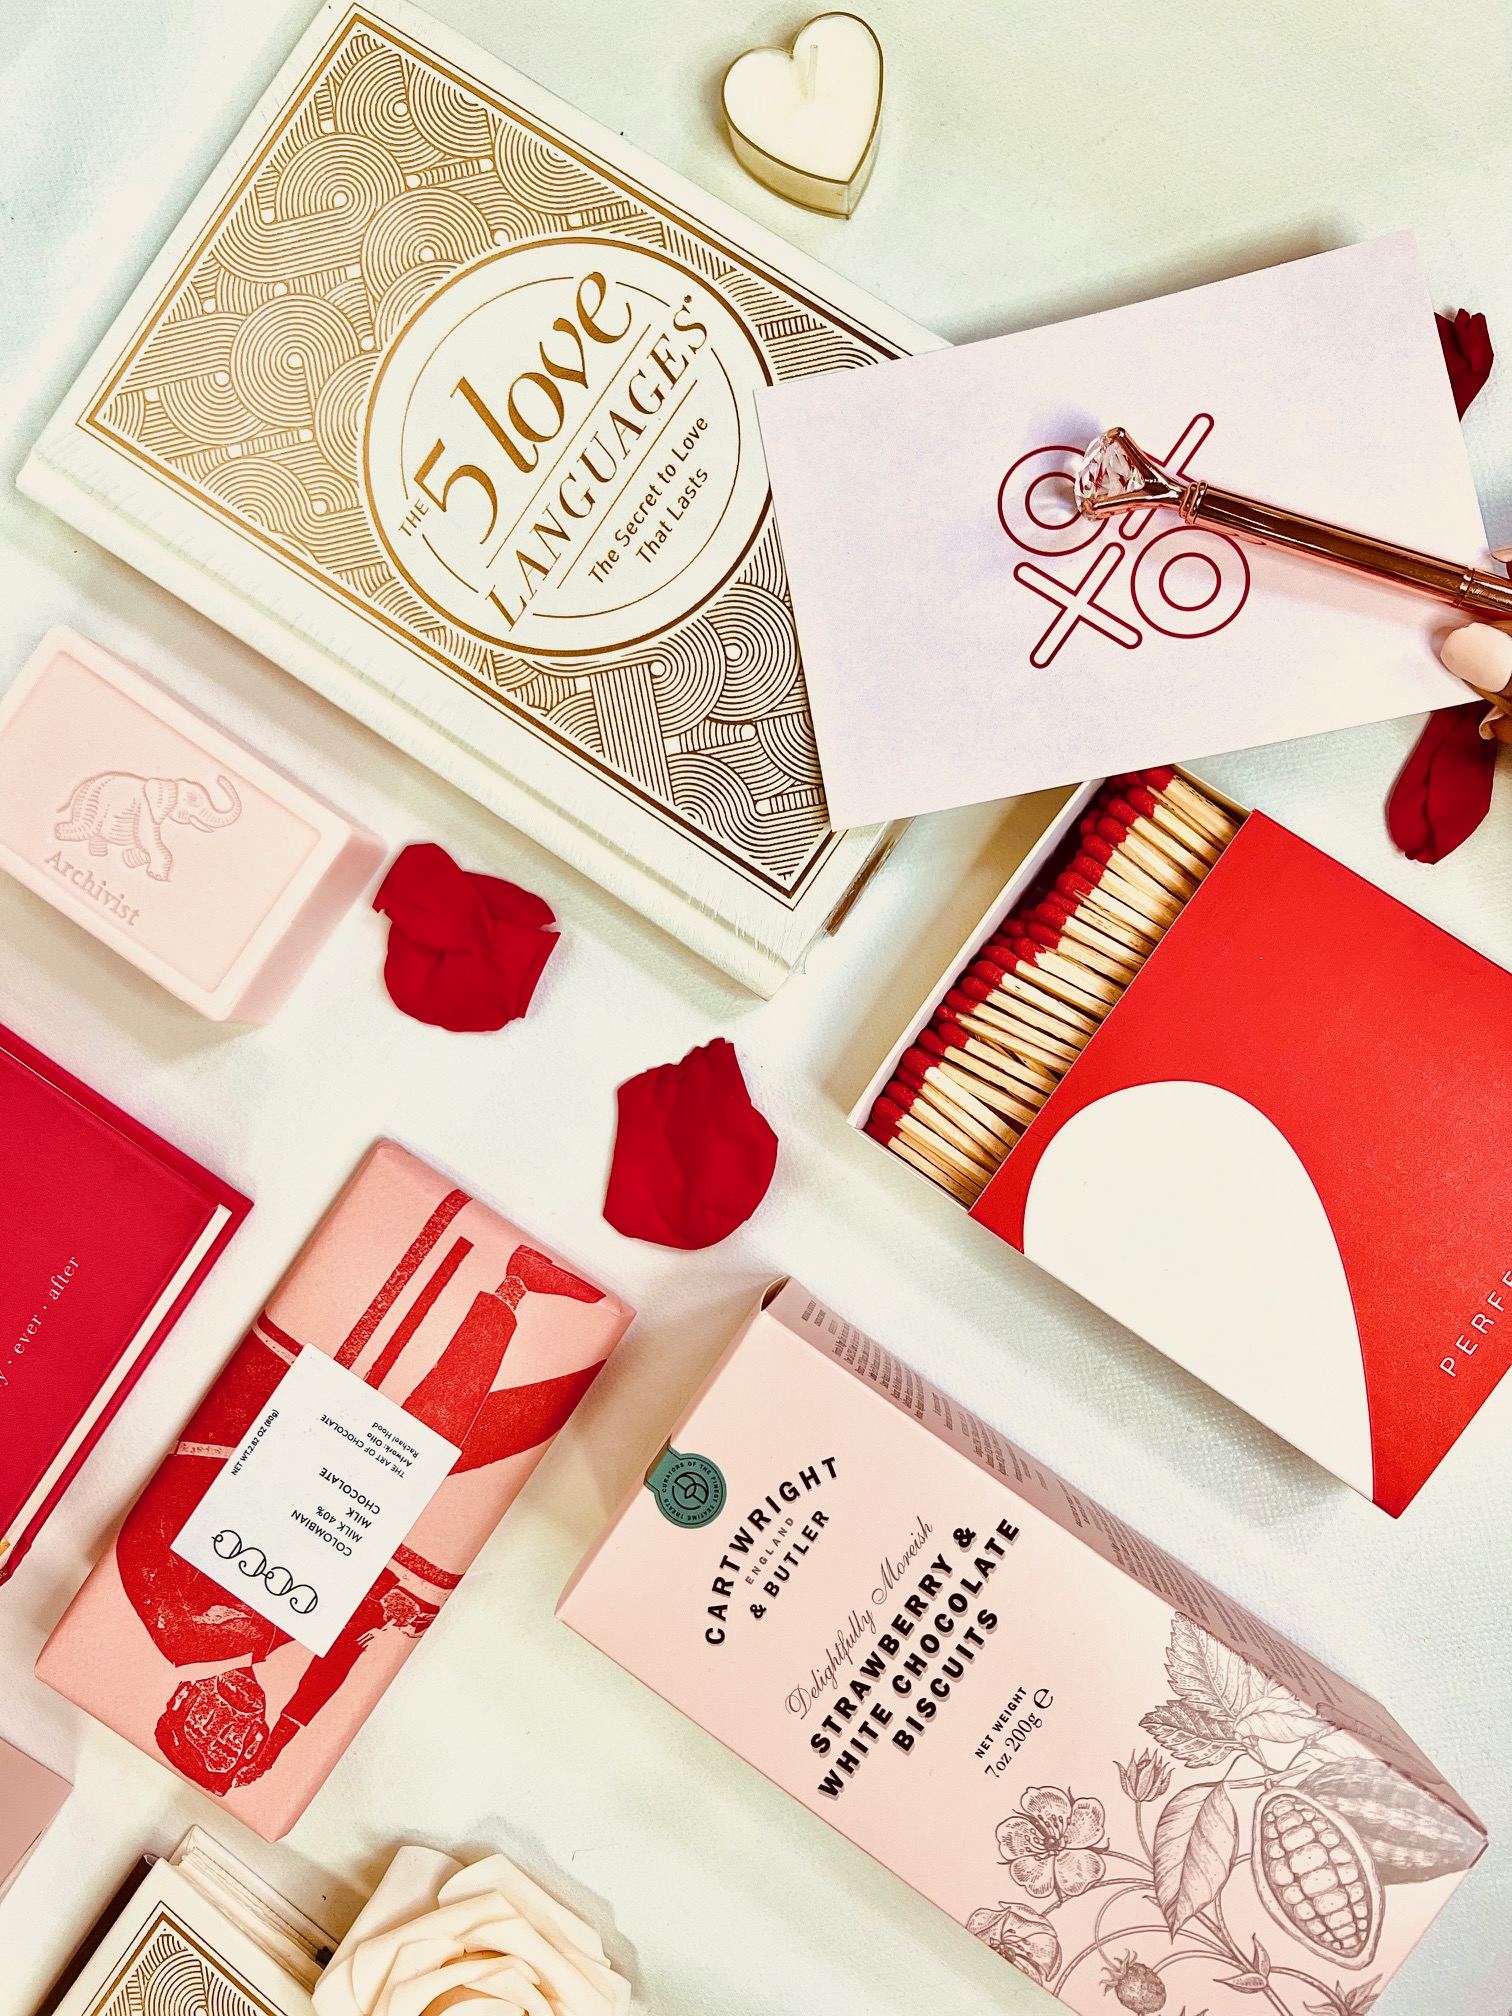 Creative Valentine’s Day Gifts to Make Your Loved One Smile